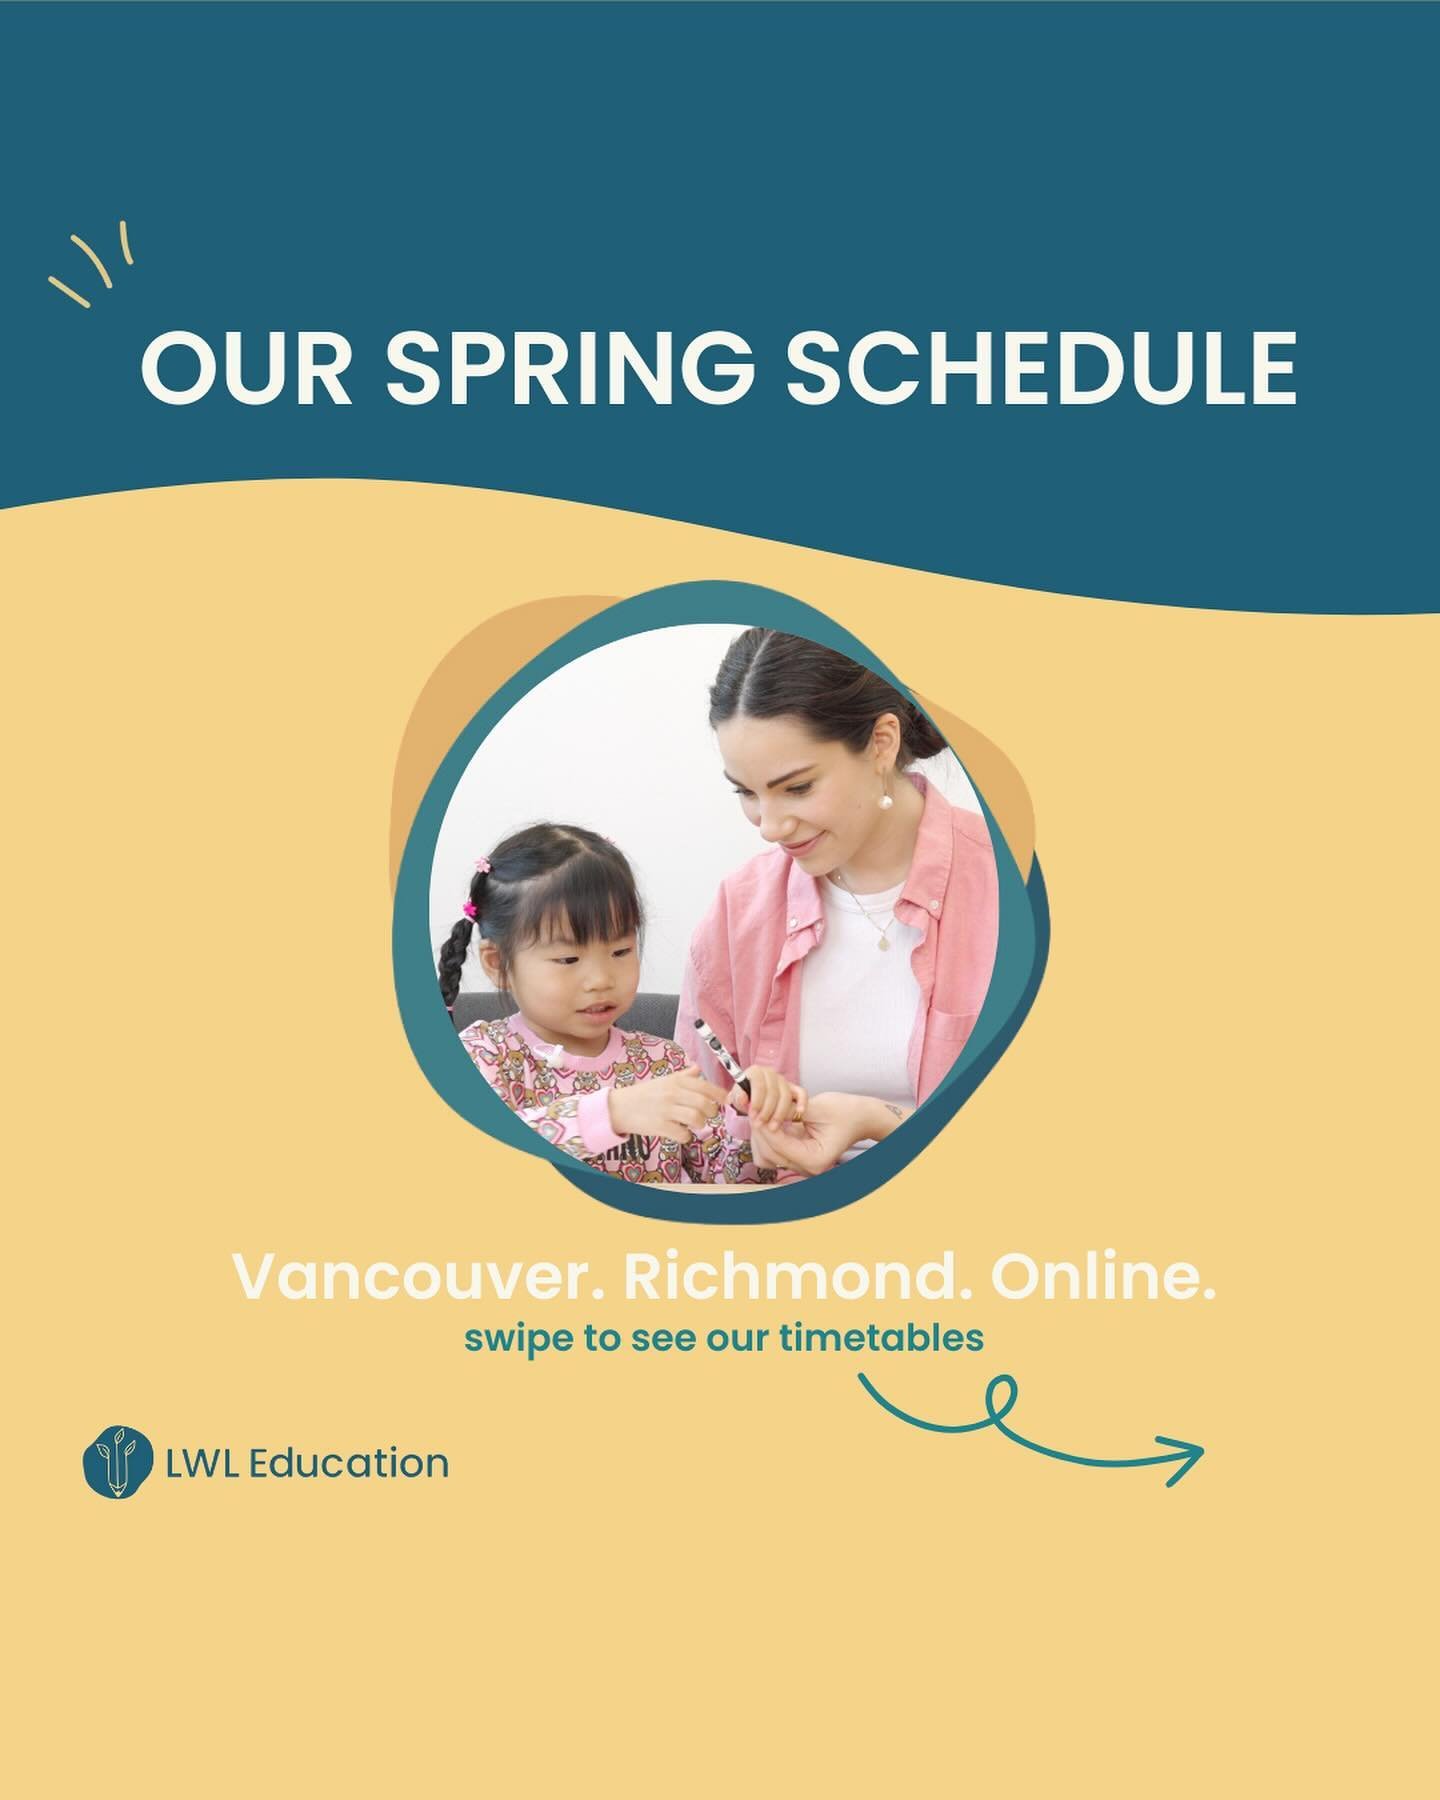 our spring schedule is live! 🌸 📅 visit our website to see our 3 simple steps to book your class: https://www.lwleducation.com/how-to-book #joyfullearning #publicspeaking #creativewriting #novelstudy #phonicsandspelling #french #mathfundamentals #ar